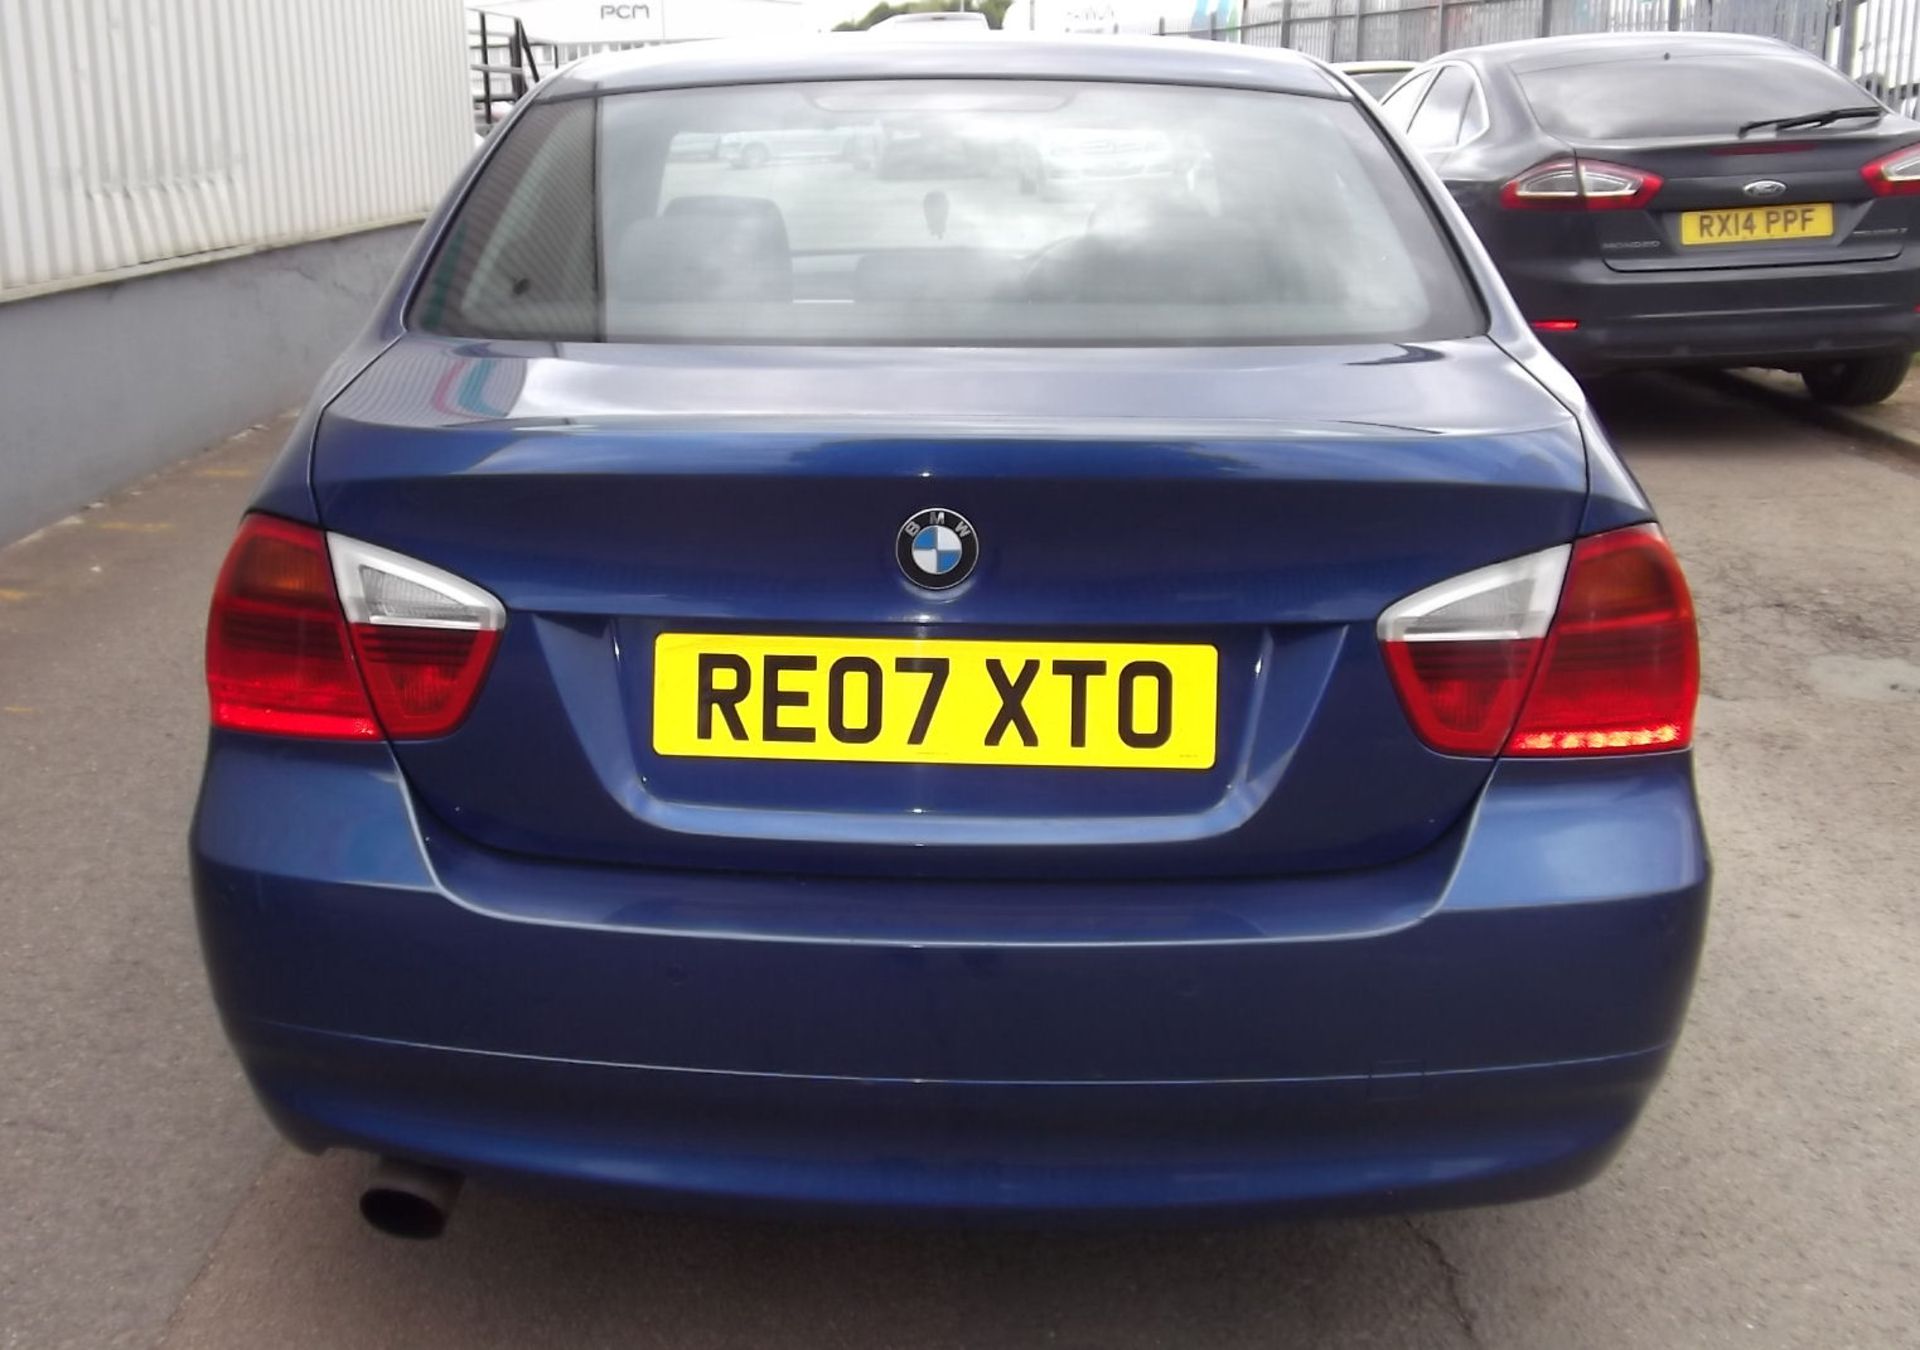 2007 BMW 318i SE 4 Door Saloon - CL505 - NO VAT ON THE HAMMER - Location: Corby - Image 5 of 11